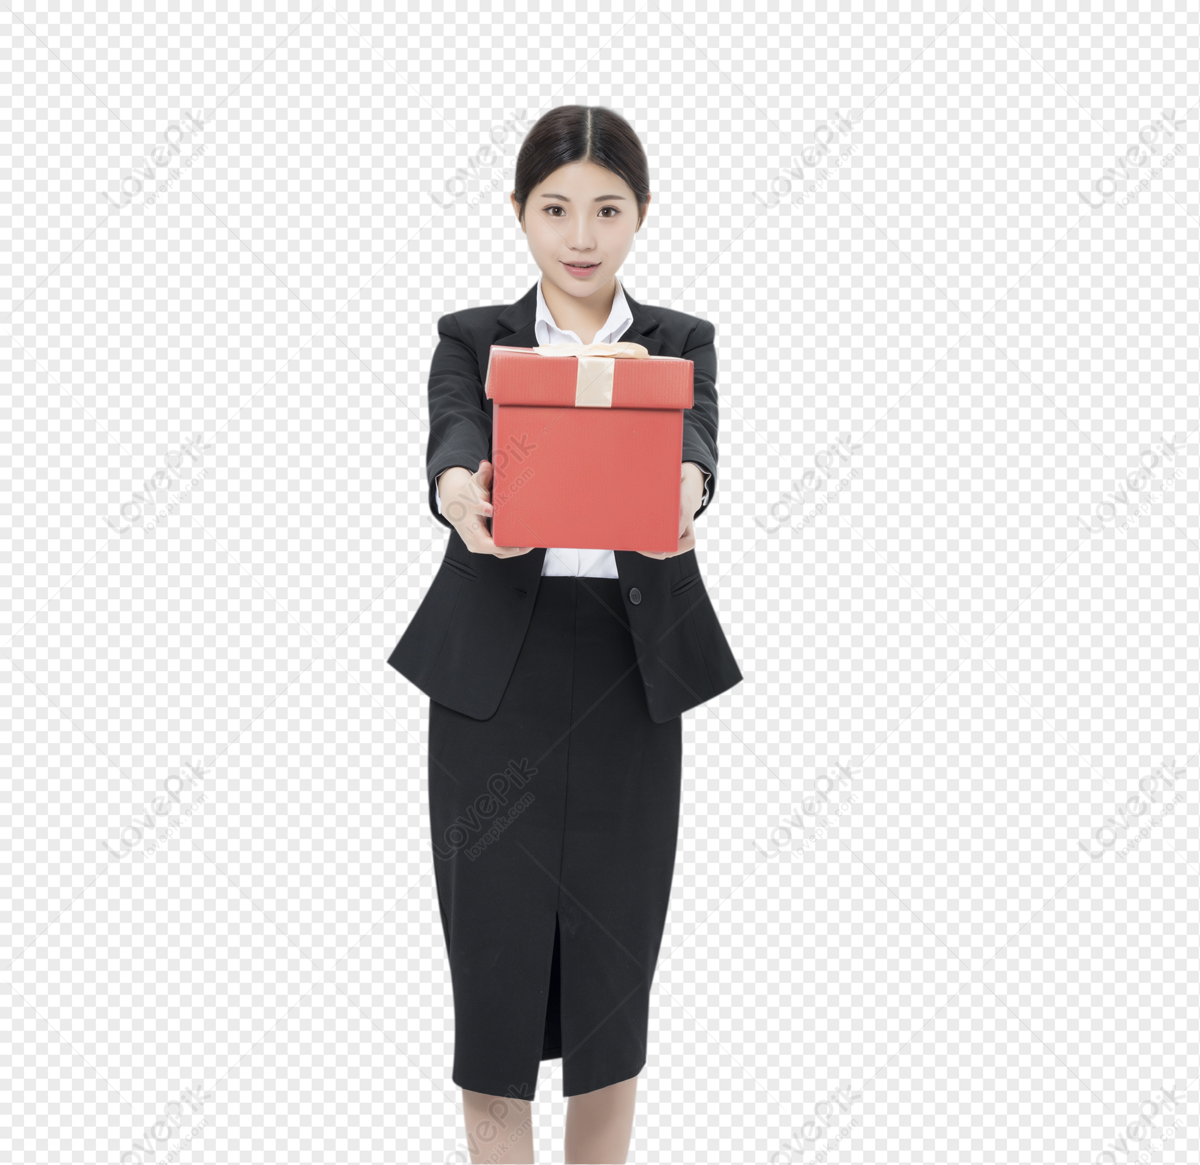 Professional woman giving a present, shelf, give present, professional woman png transparent background